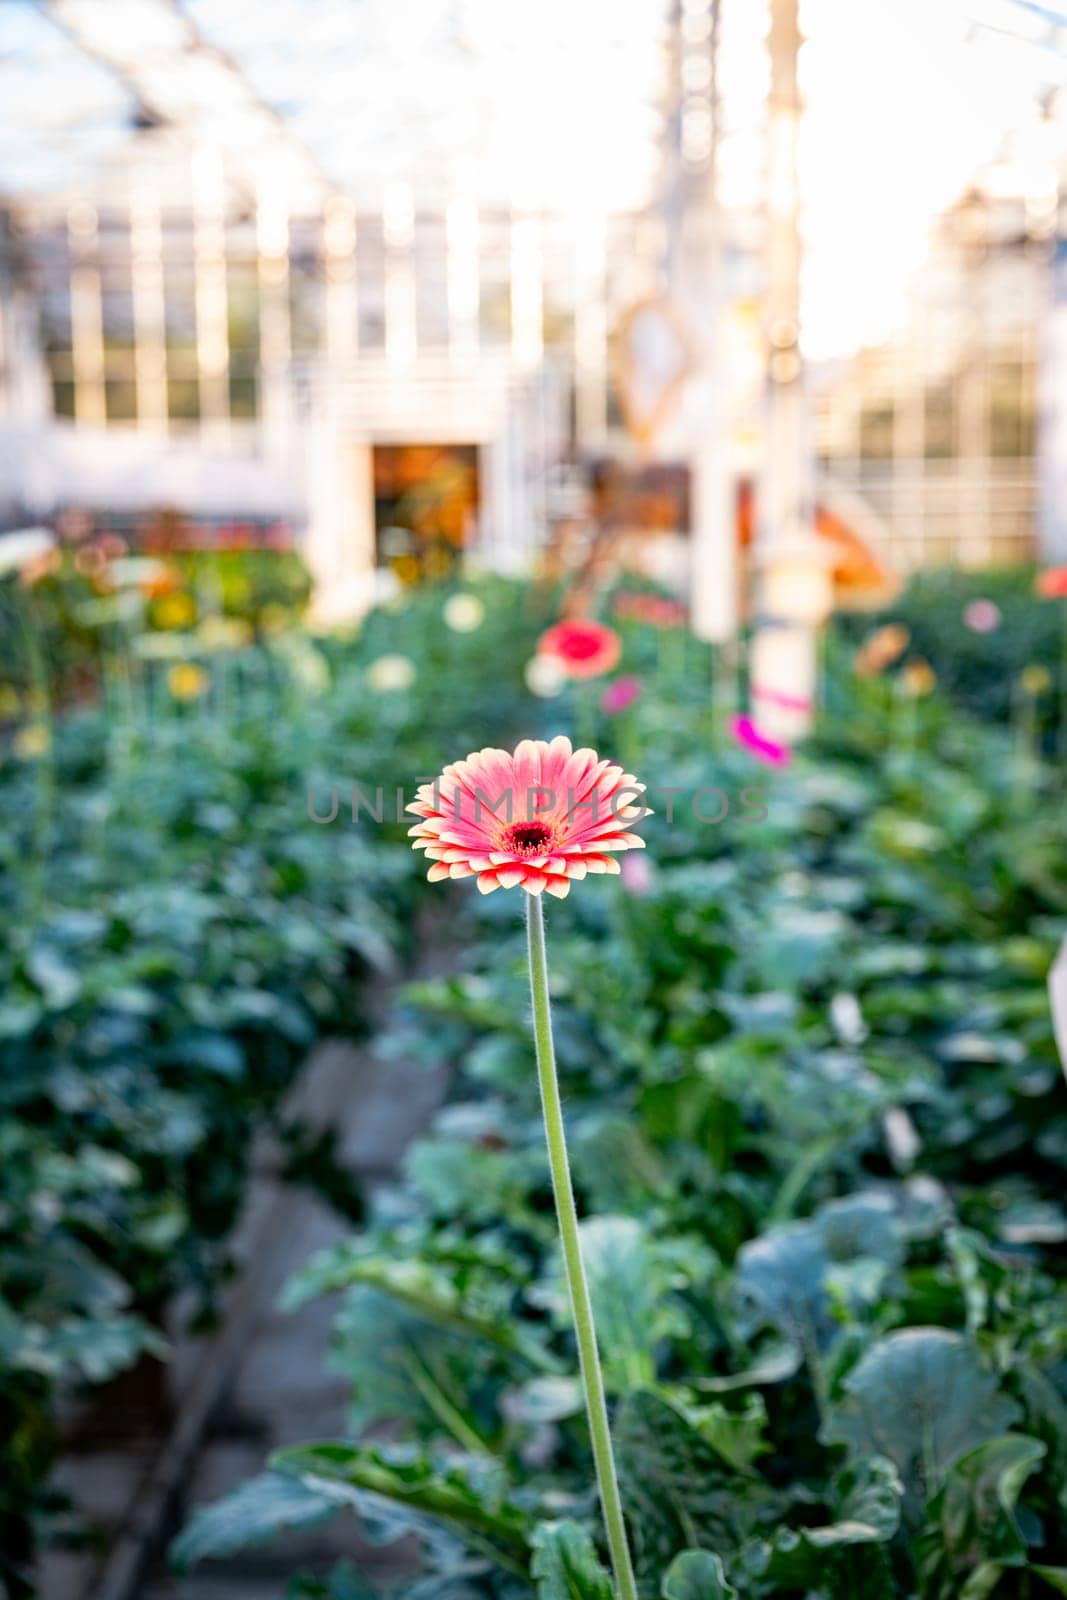 an indoor greenhouse where gerberas are grown by compuinfoto